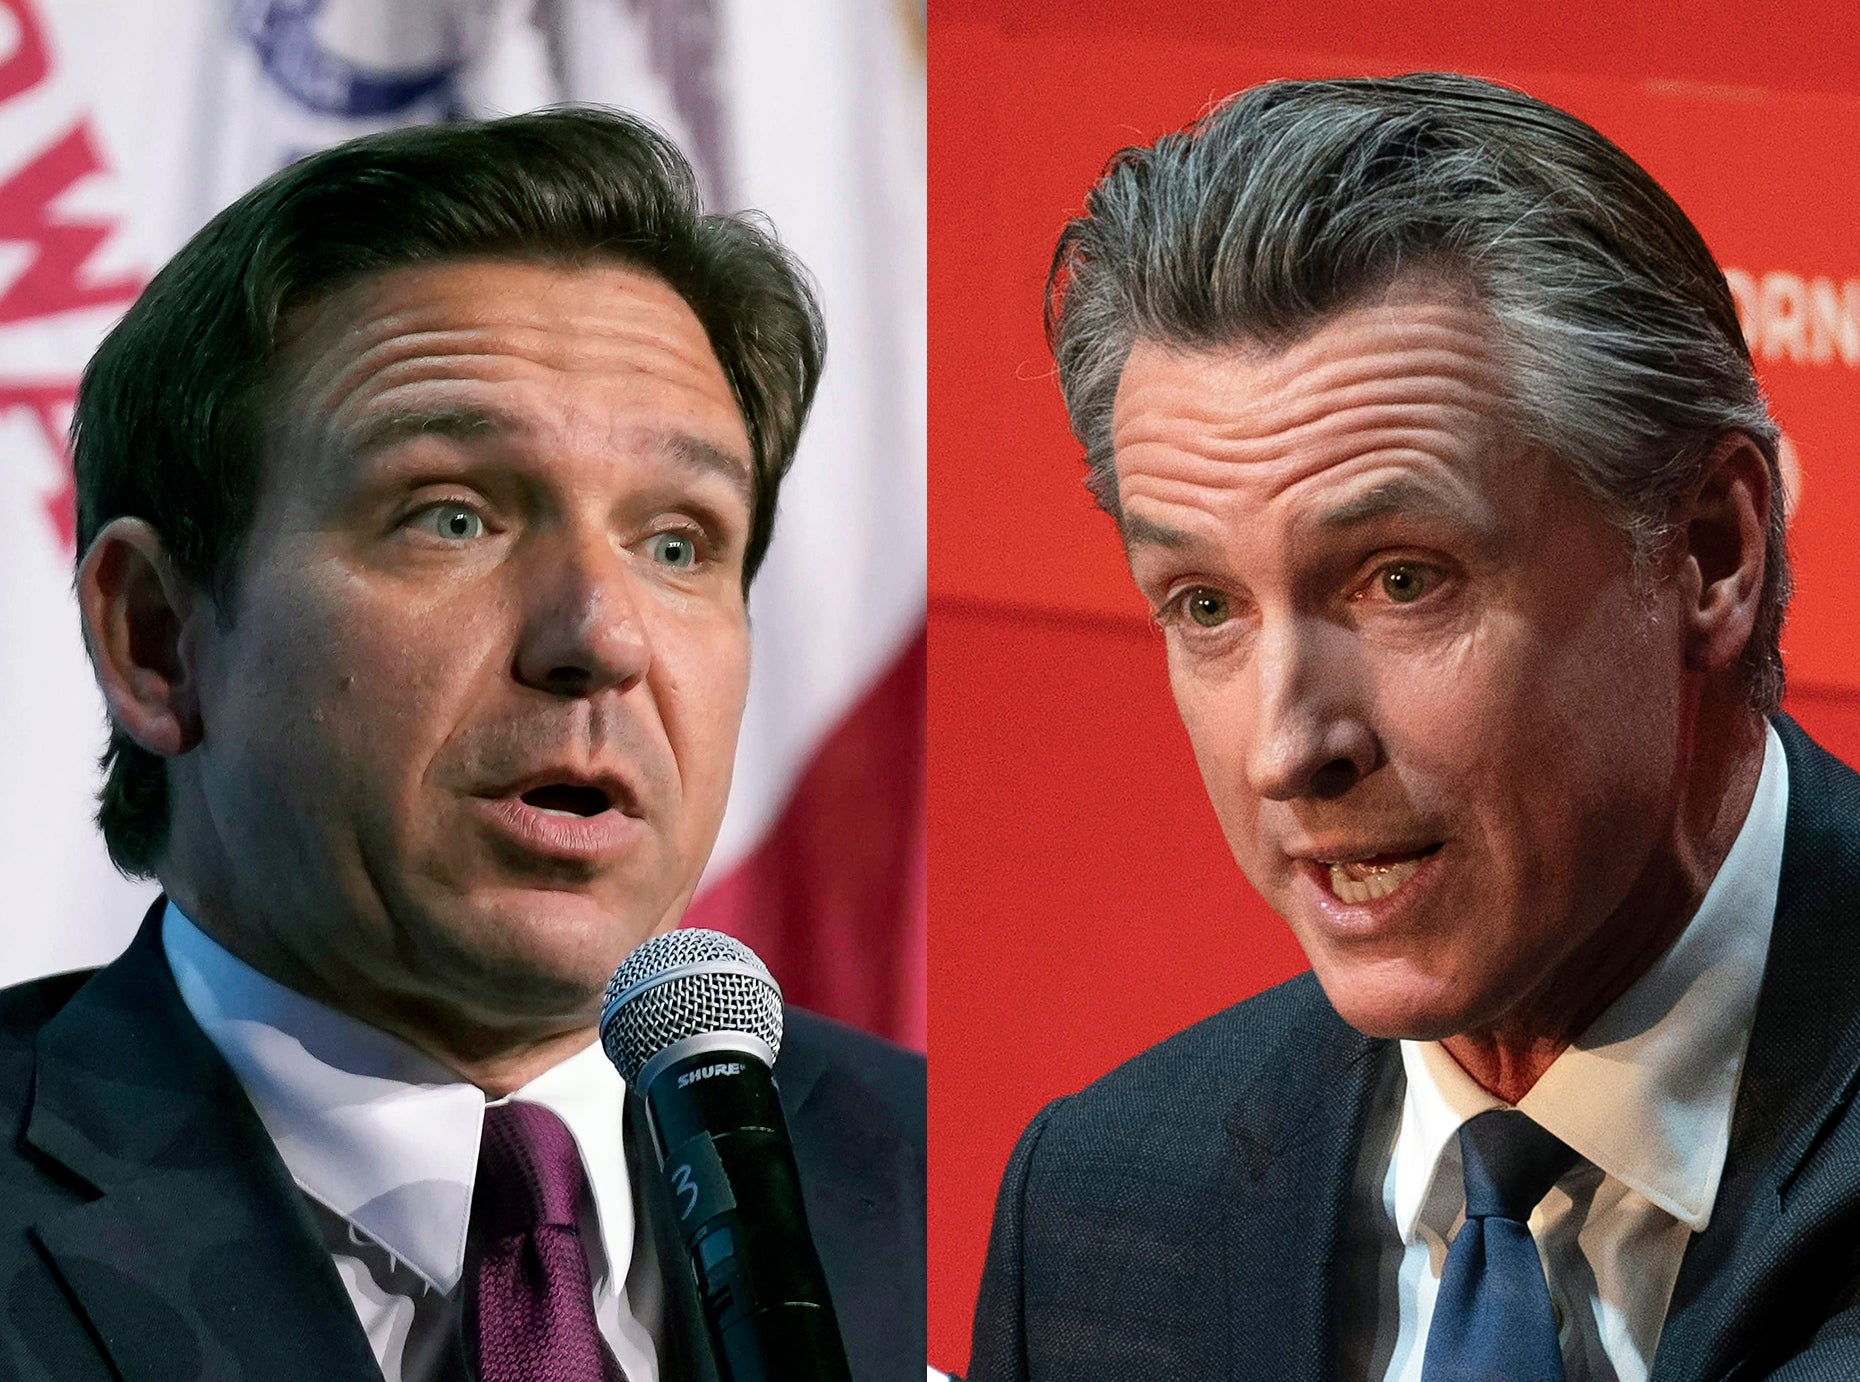 Ron DeSantis’s 2024 campaign is flagging, while Gavin Newsom is accused of secretly seeking the White House himself